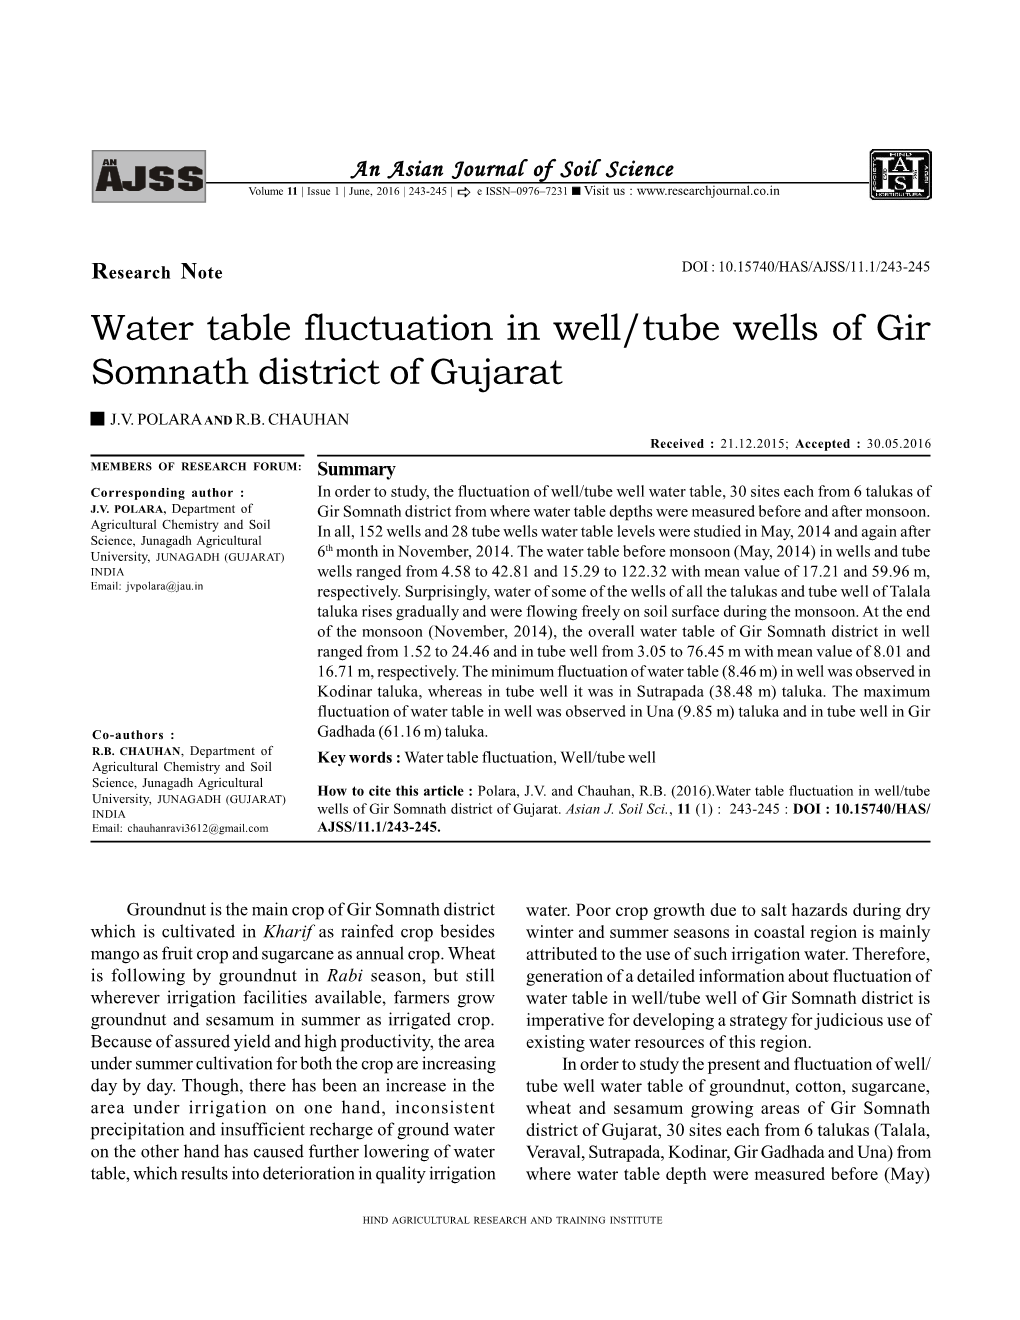 Water Table Fluctuation in Well/Tube Wells of Gir Somnath District of Gujarat